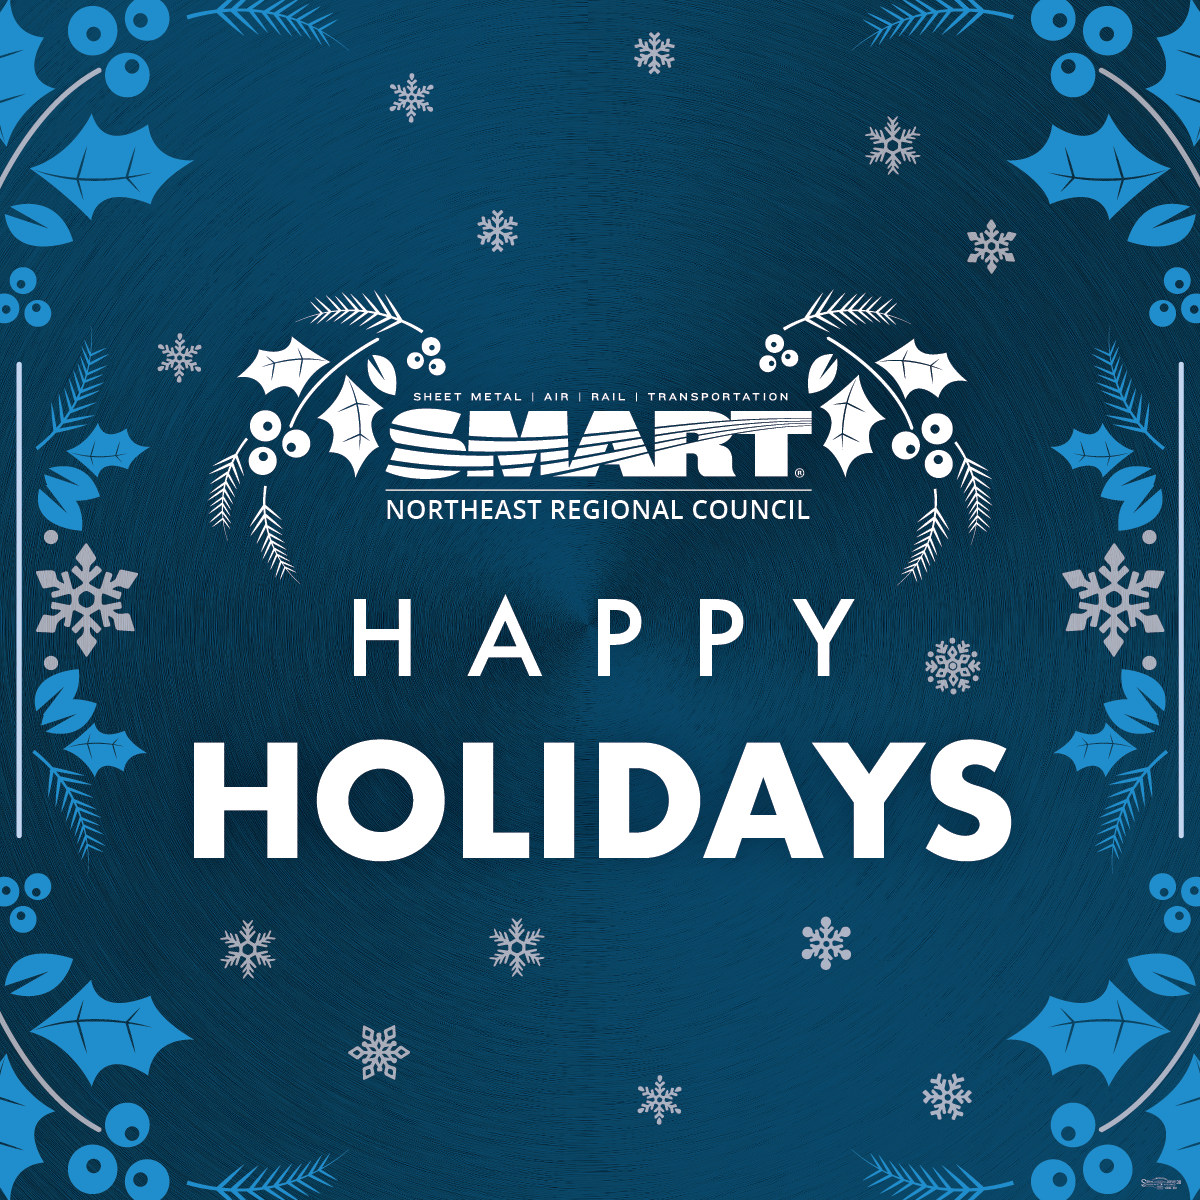 happy holidays greeting from SMART NERC